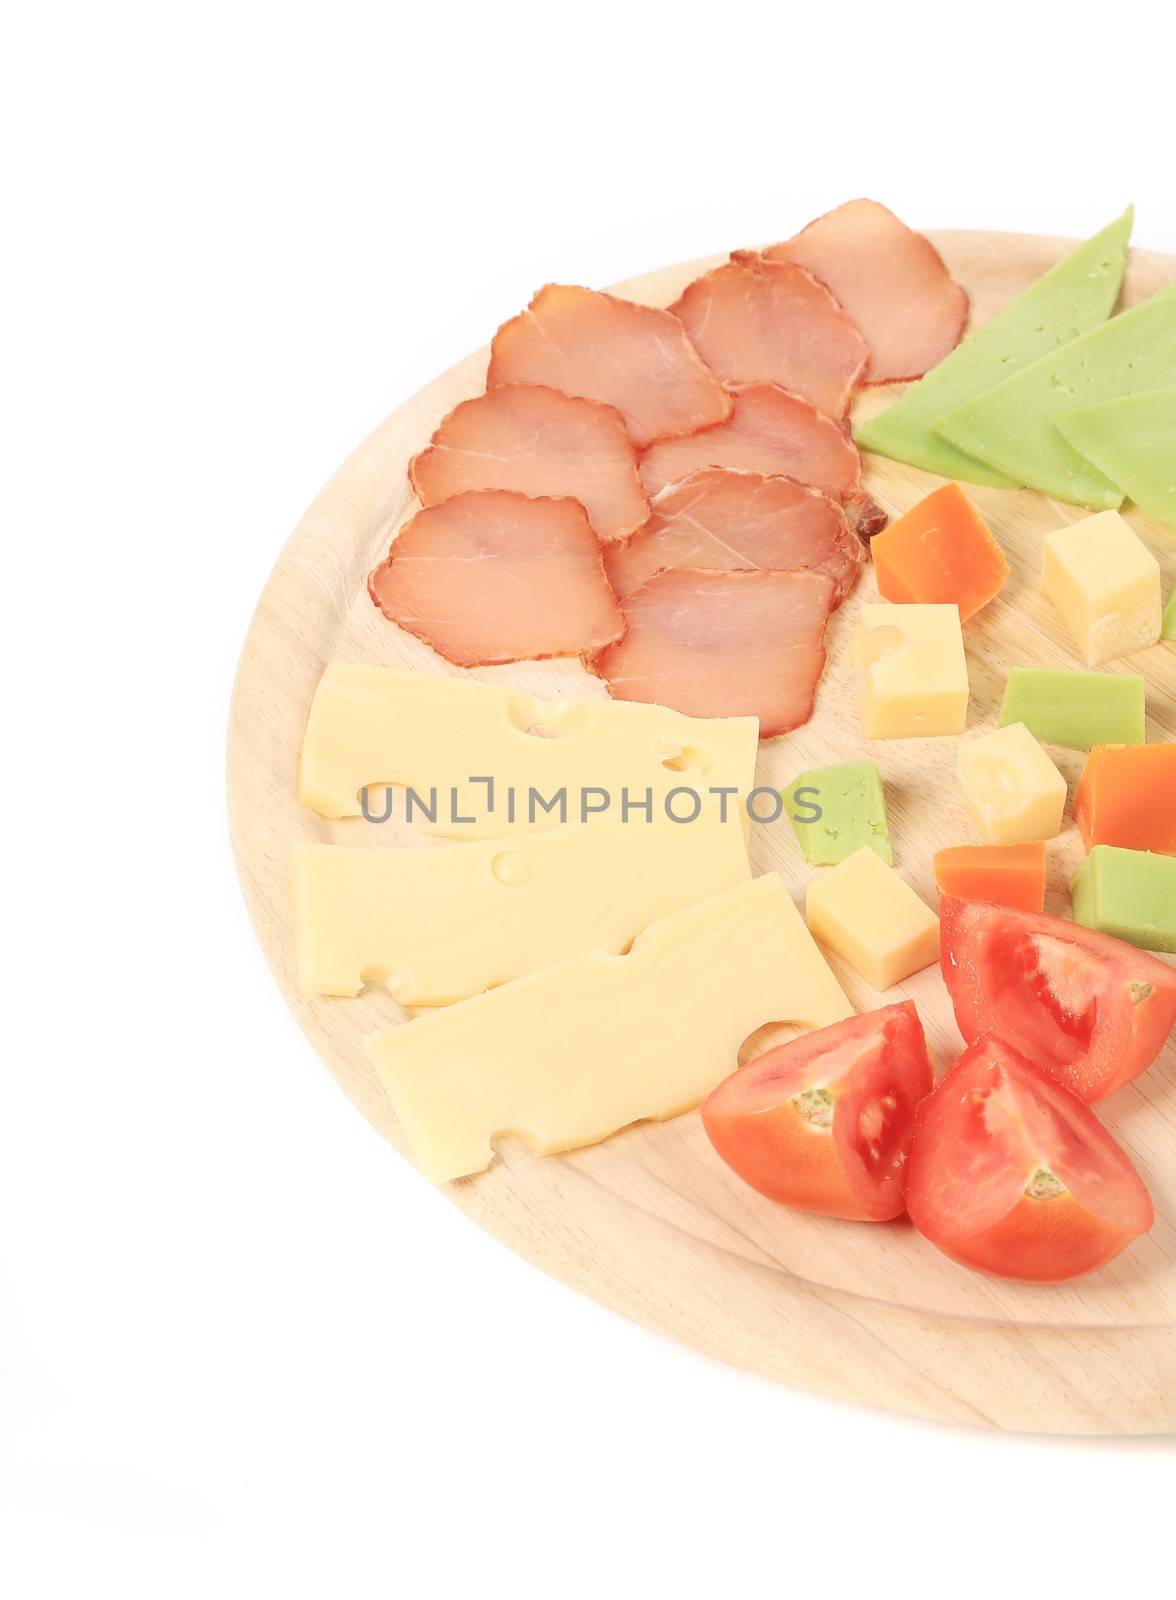 Meat and cheese plate. Isolated on a white background.